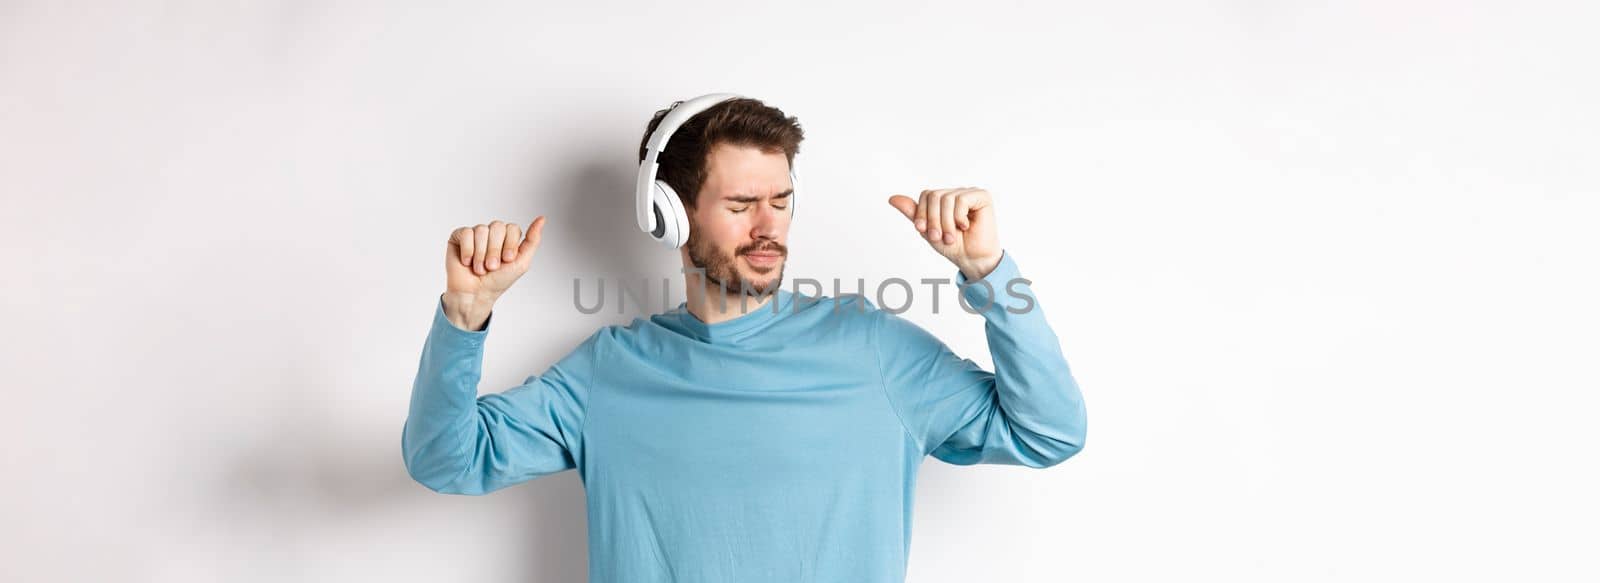 Happy young man having fun in headphones, dancing while listening music in wireless earphones, white background.